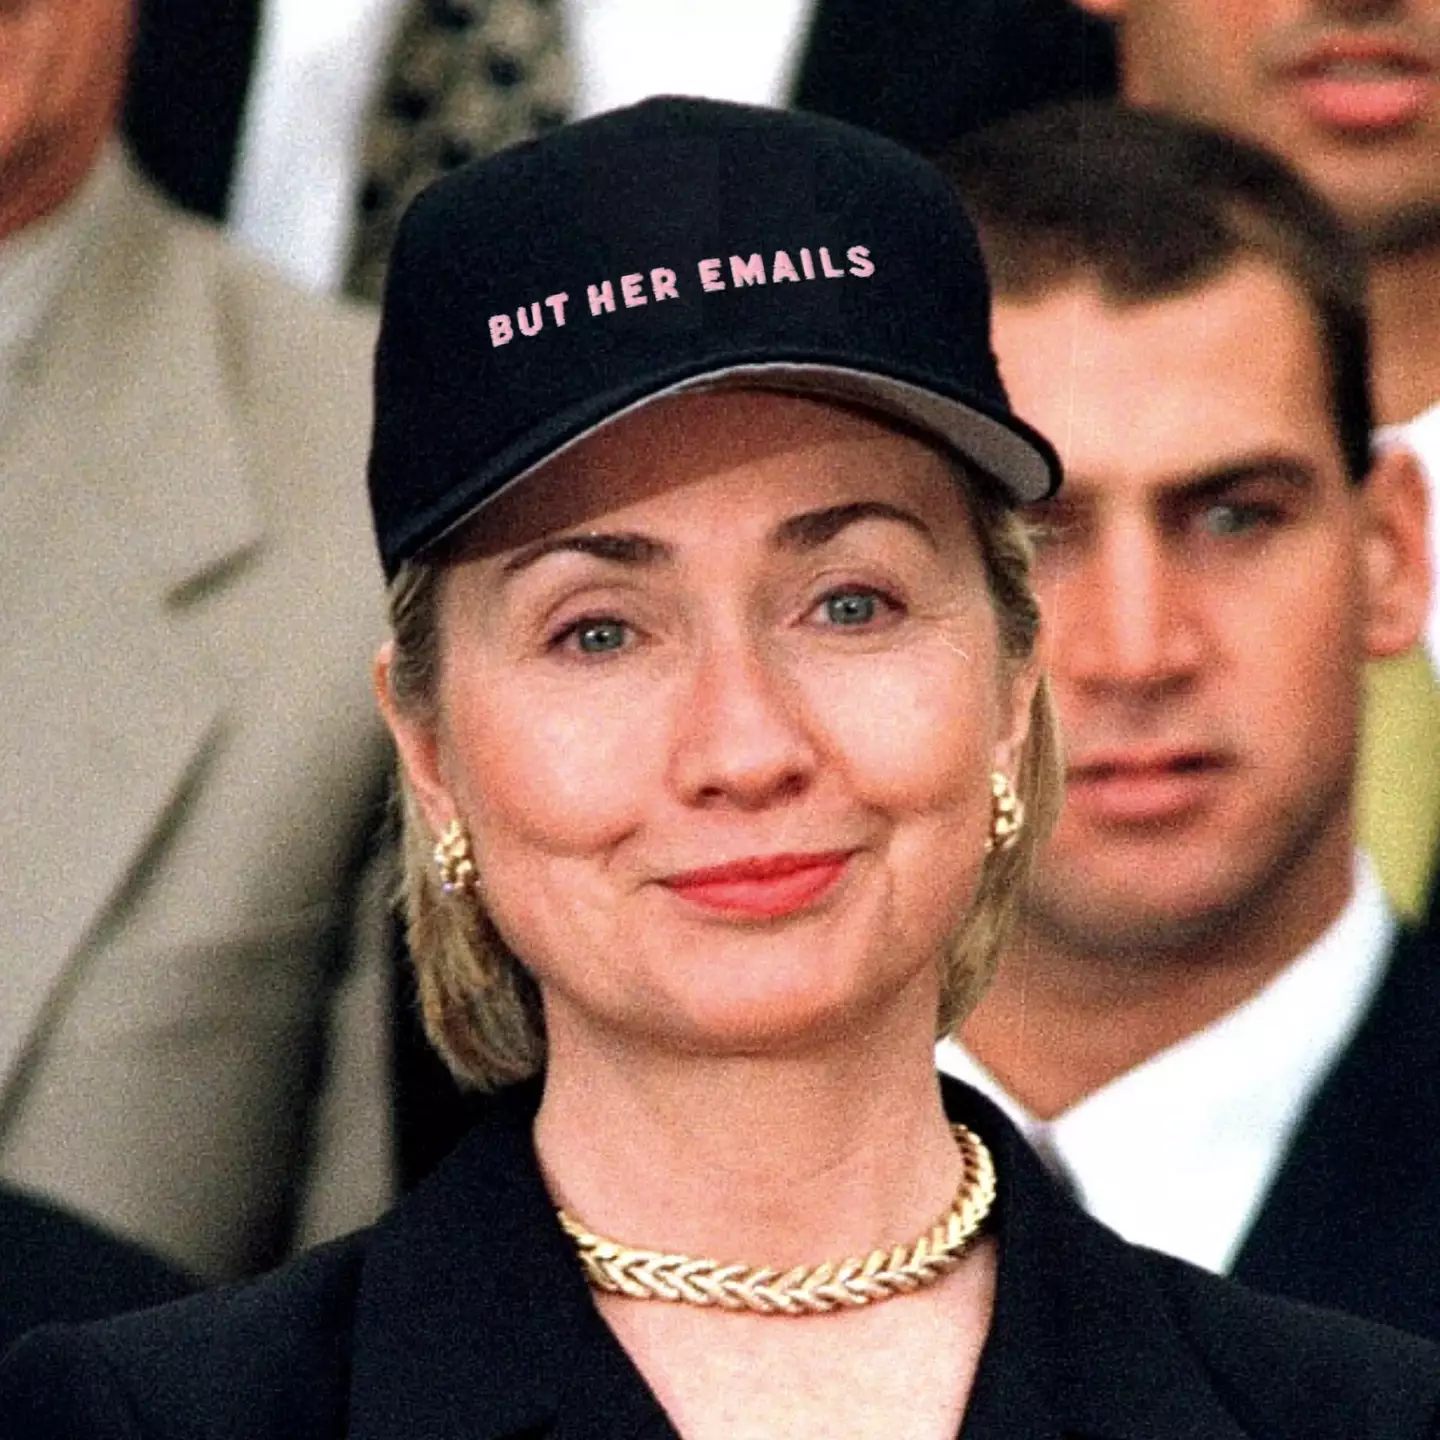 Hillary Clinton's new hat sold out.